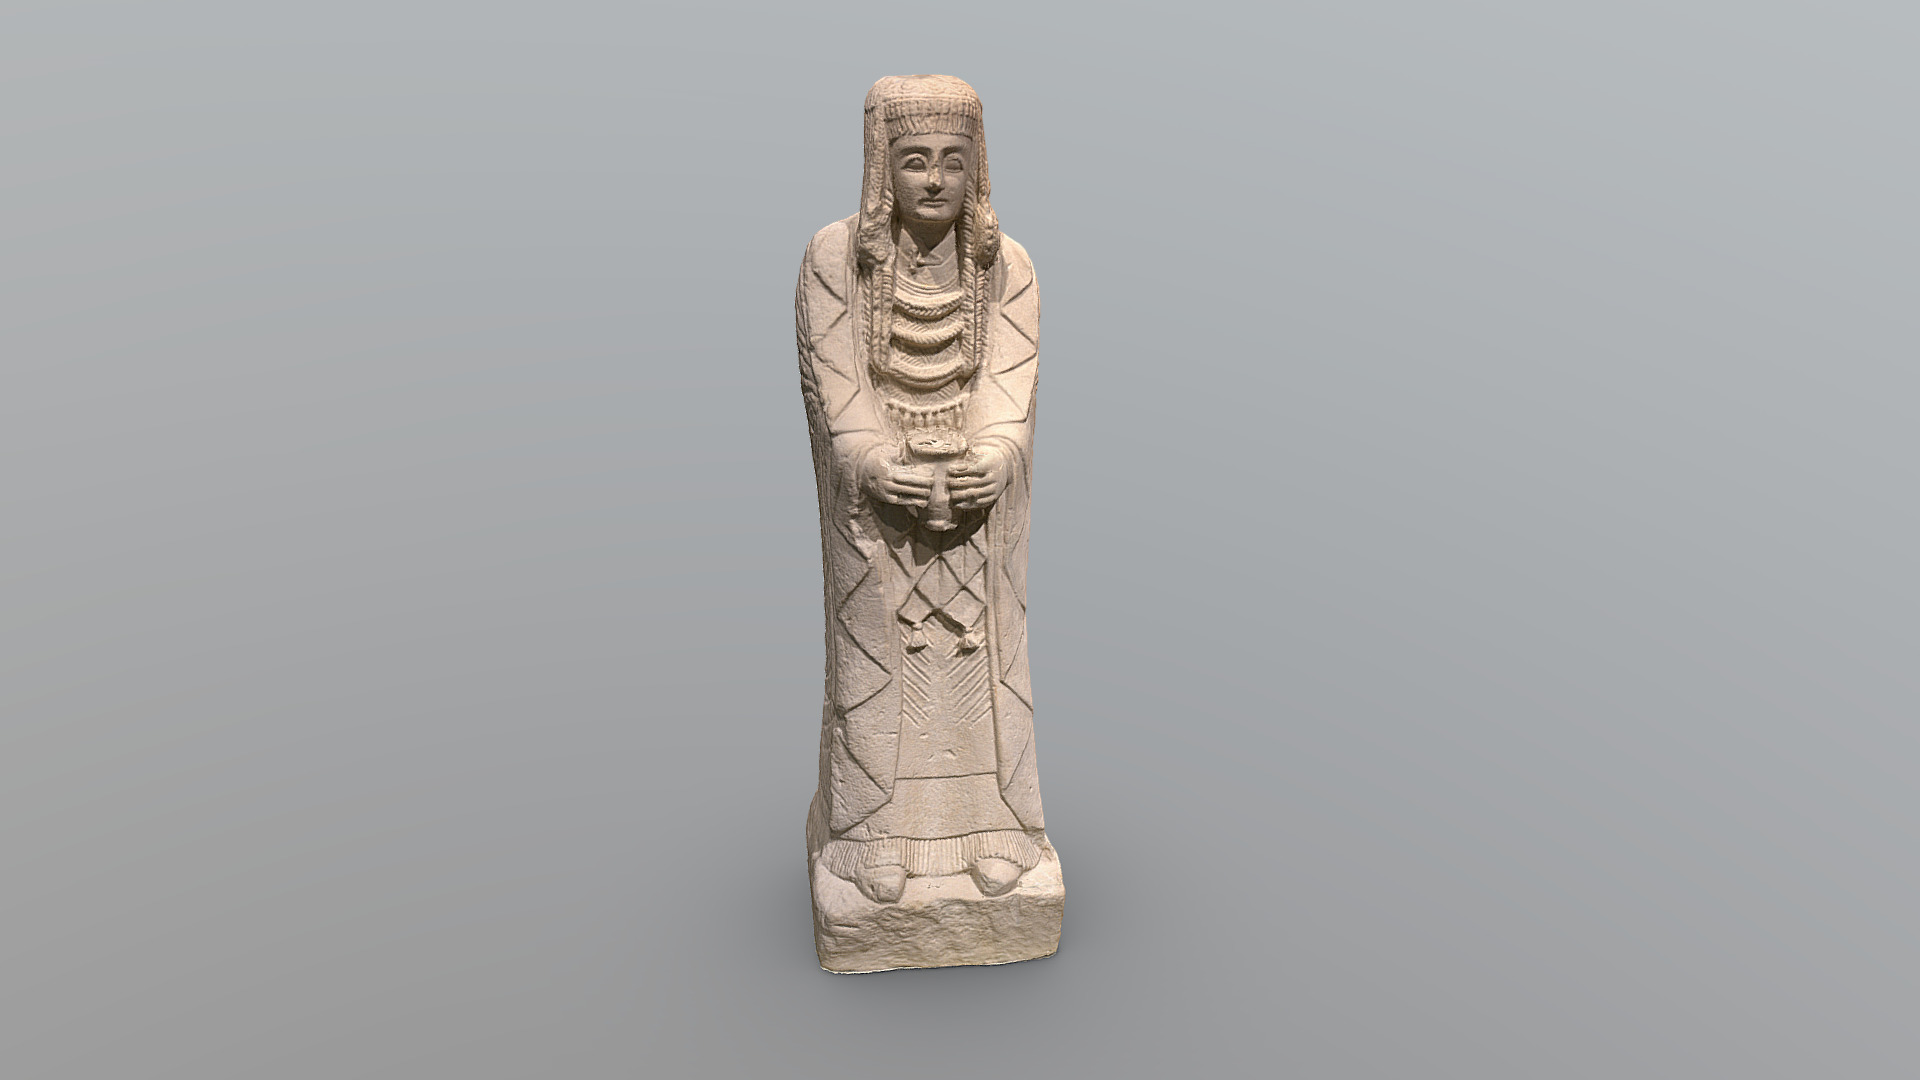 3D model Dama Oferente - This is a 3D model of the Dama Oferente. The 3D model is about a statue of a person.